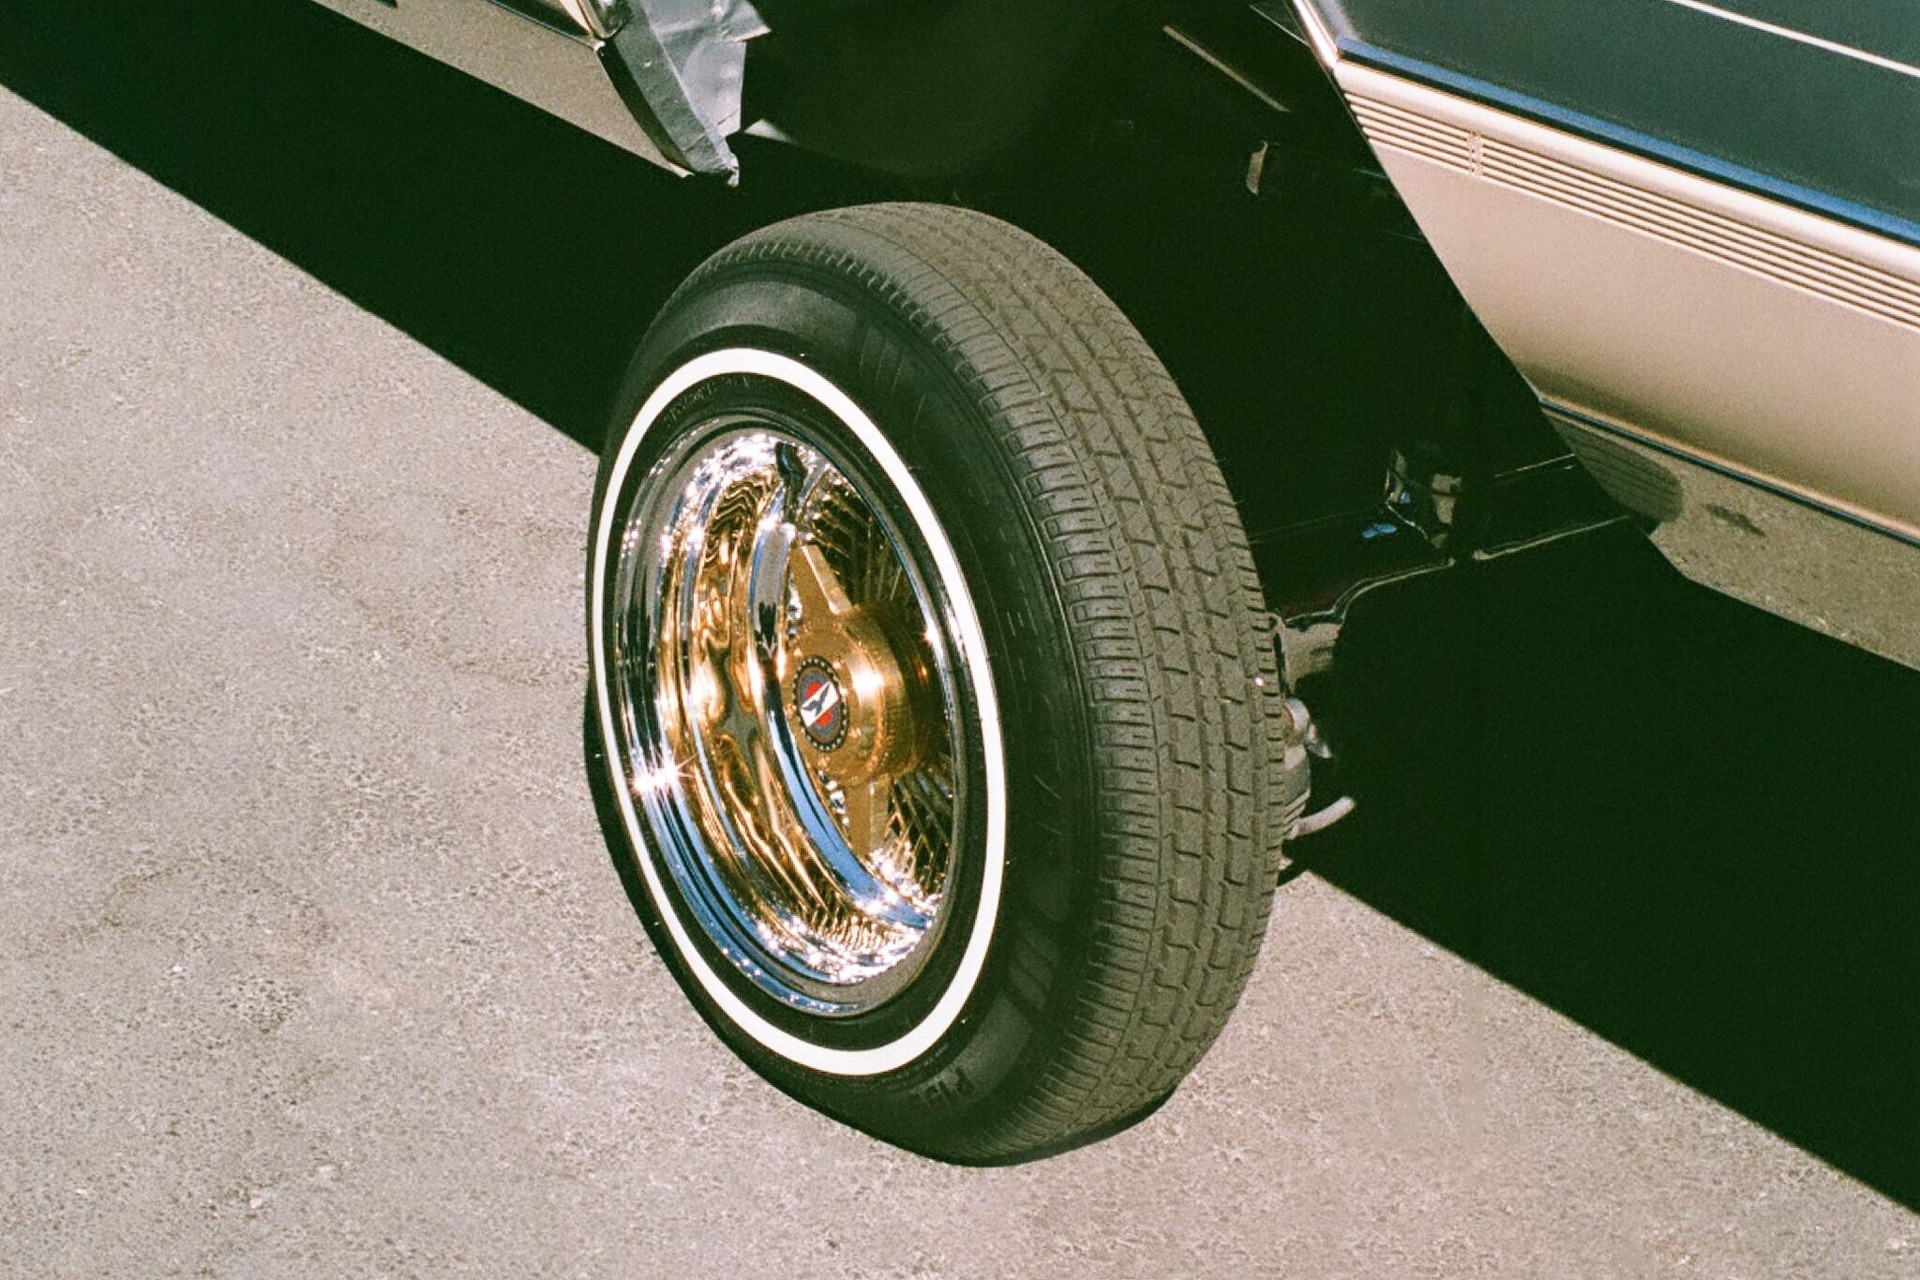 Car tire with a modded suspension